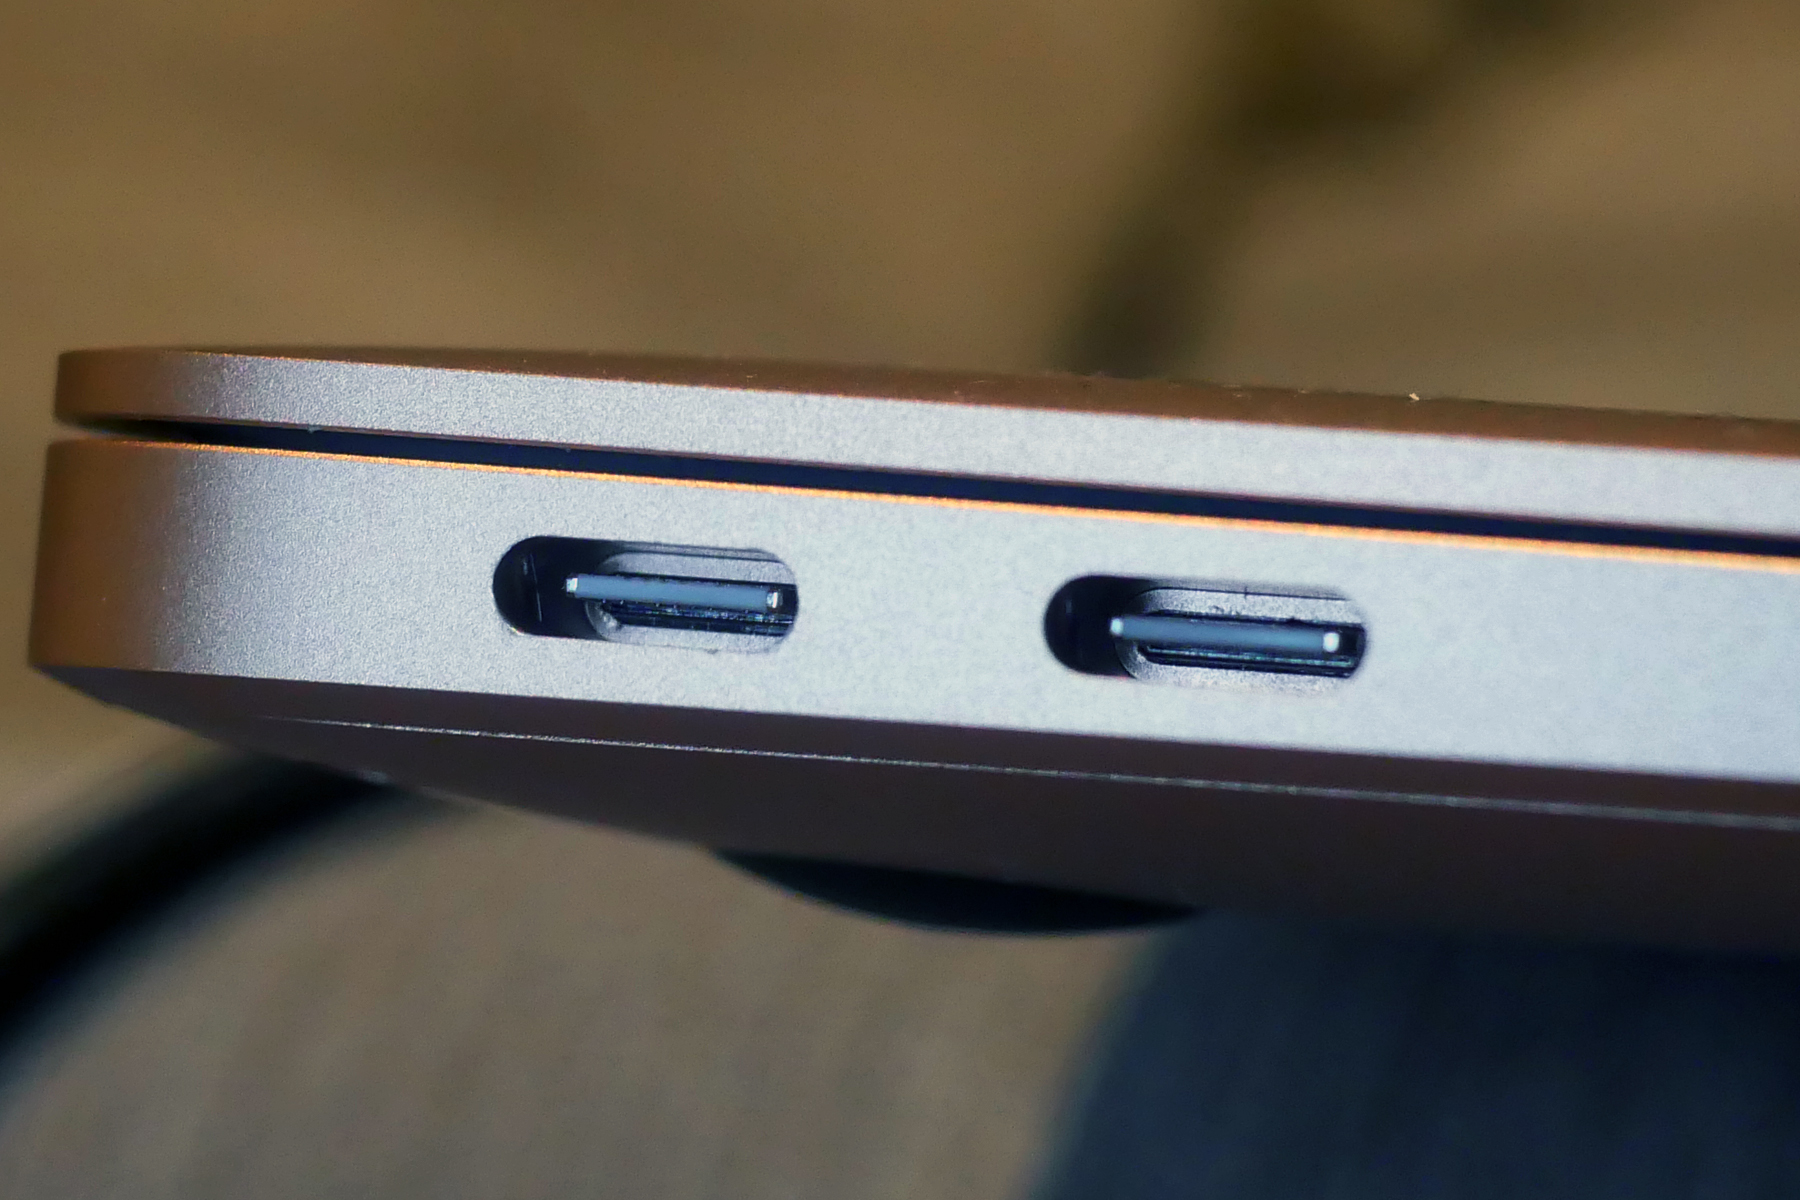 USB-C ports are commonly called ‘Android chargers’ but this is incorrect. They’re found not just on most Android devices released in the past two to three years, but also all iPad Pros made since 2018, Nintendo Switch consoles, many new laptops, the latest wireless headphones and power banks.